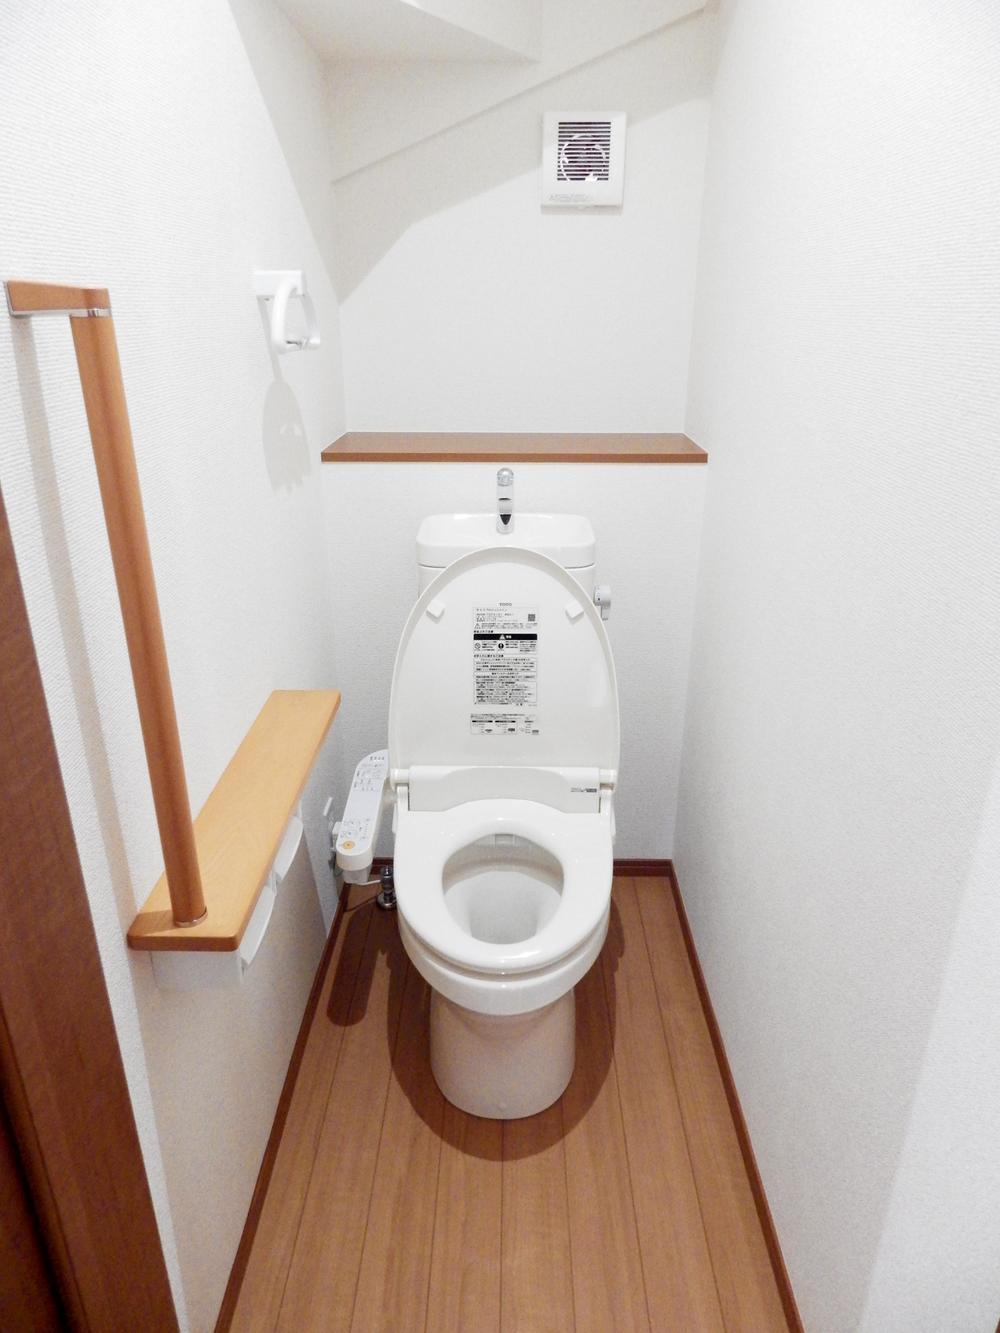 Toilet. Toilet is a picture. It is water-saving toilets. 